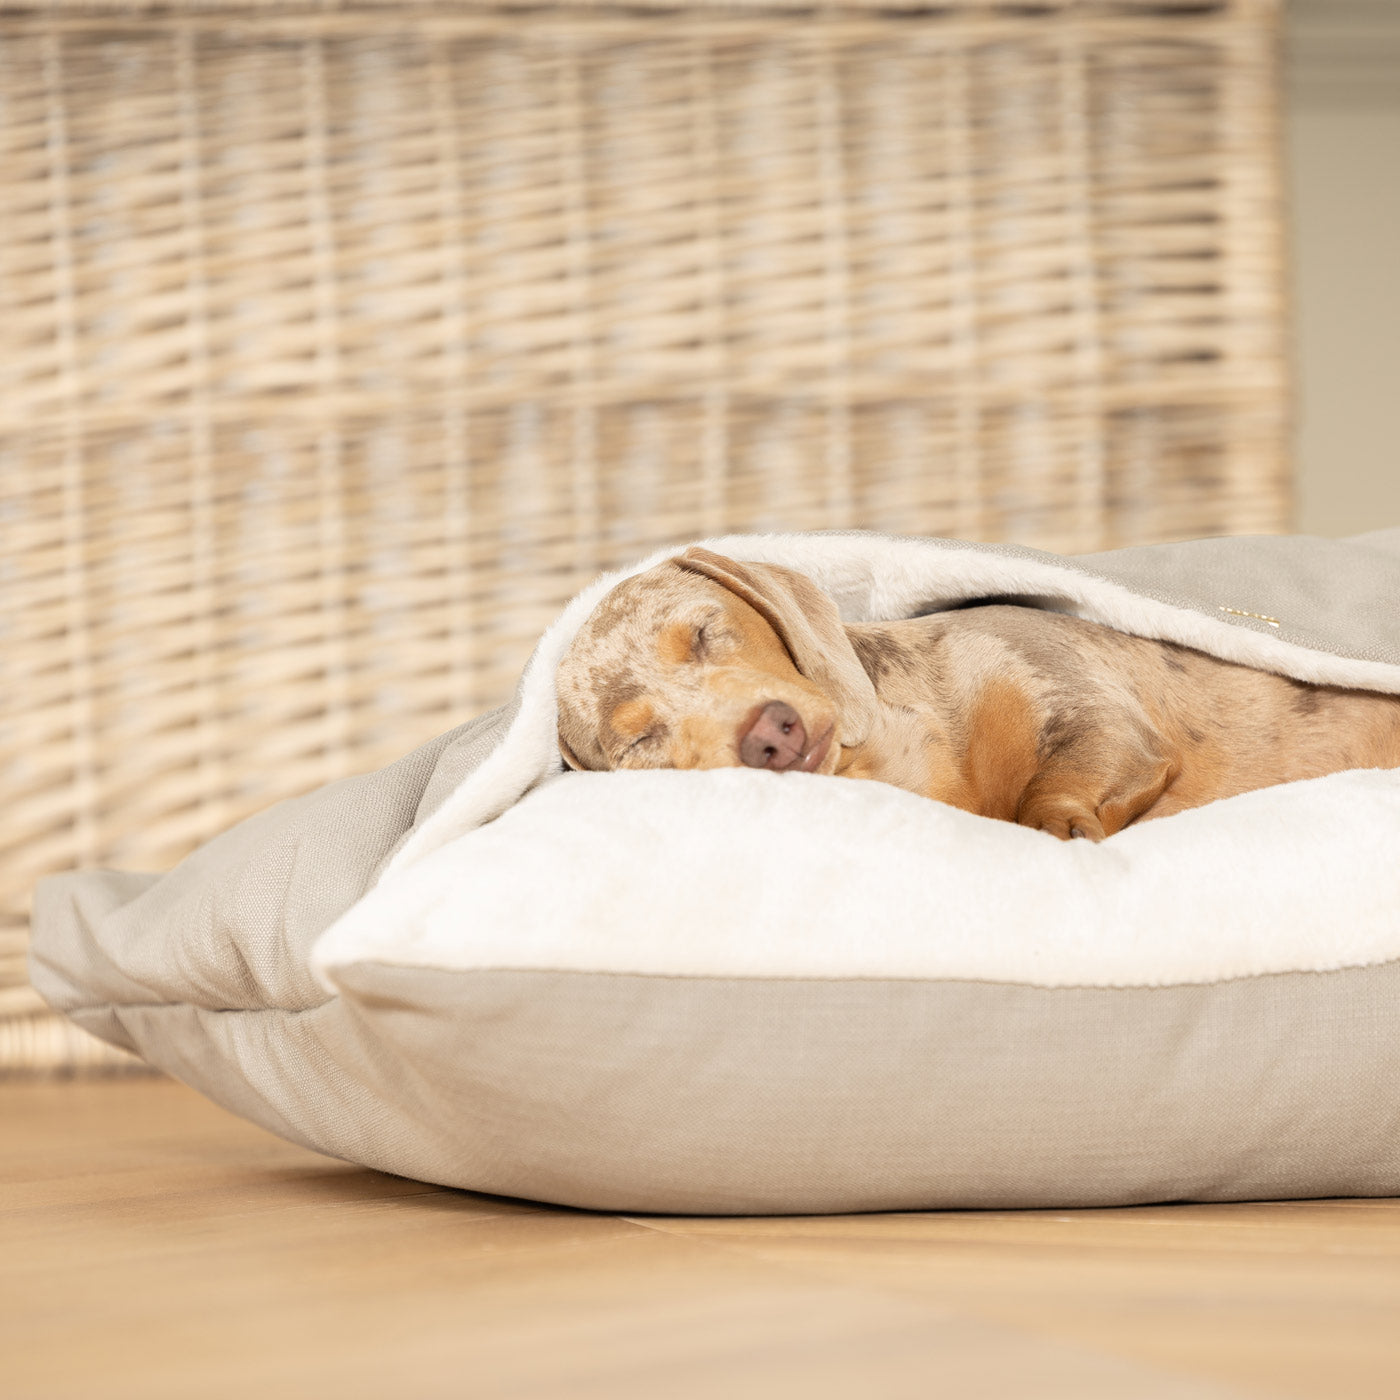 Luxury Savanna Sleepy Burrow, The Perfect bed For a Pet to Burrow. Available To Personalize In Stunning Savanna Stone, Here at Lords & Labradors US